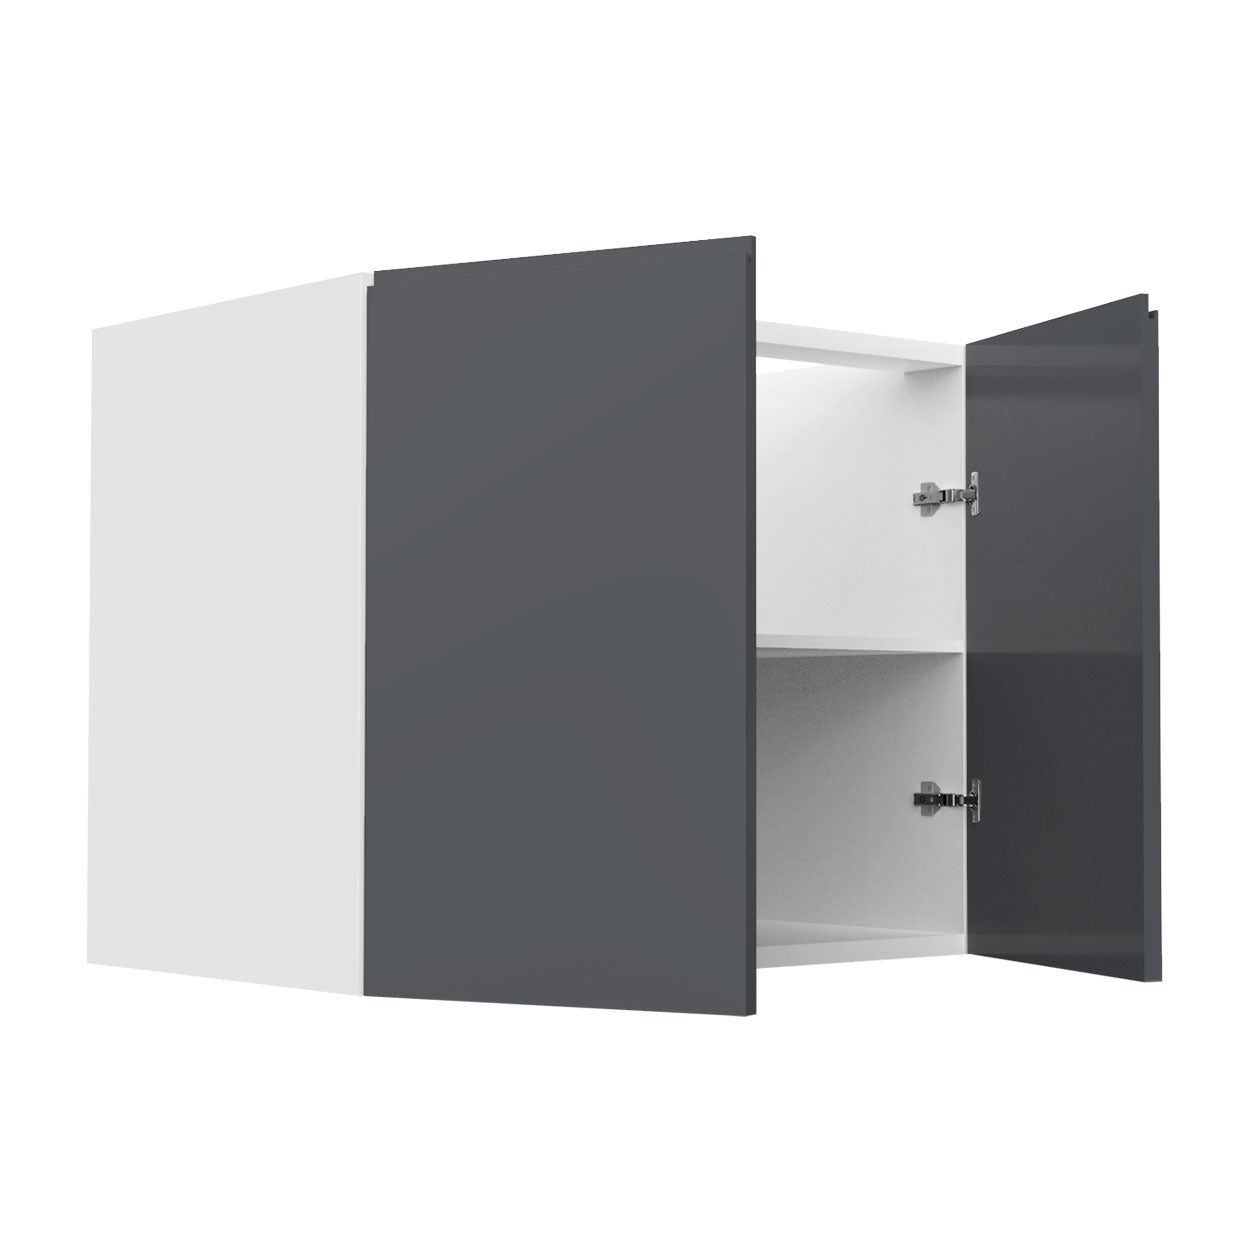 RTA - Lacquer Grey - Full Height Double Door Base Cabinets | 33"W x 30"H x 23.8"D